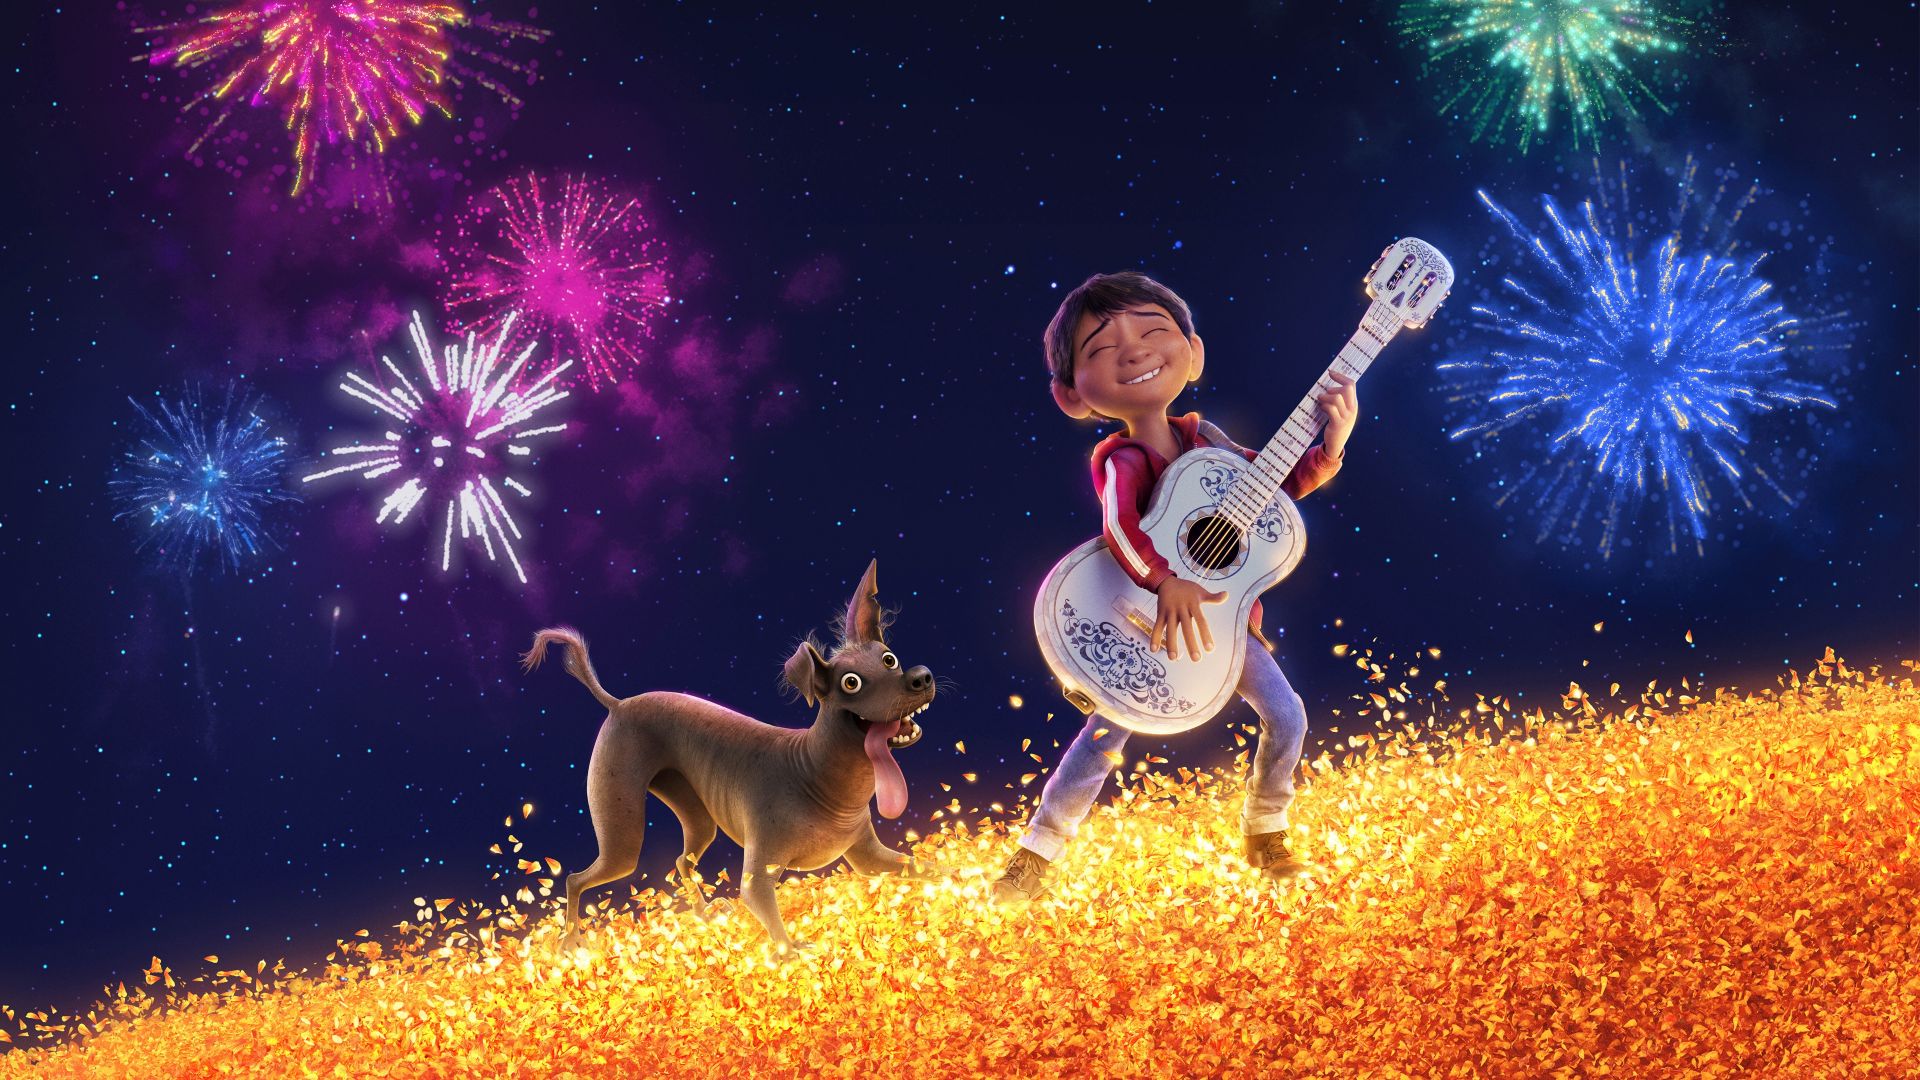 Wallpaper Coco, movie, dog and ghost, fun, firework, 4k